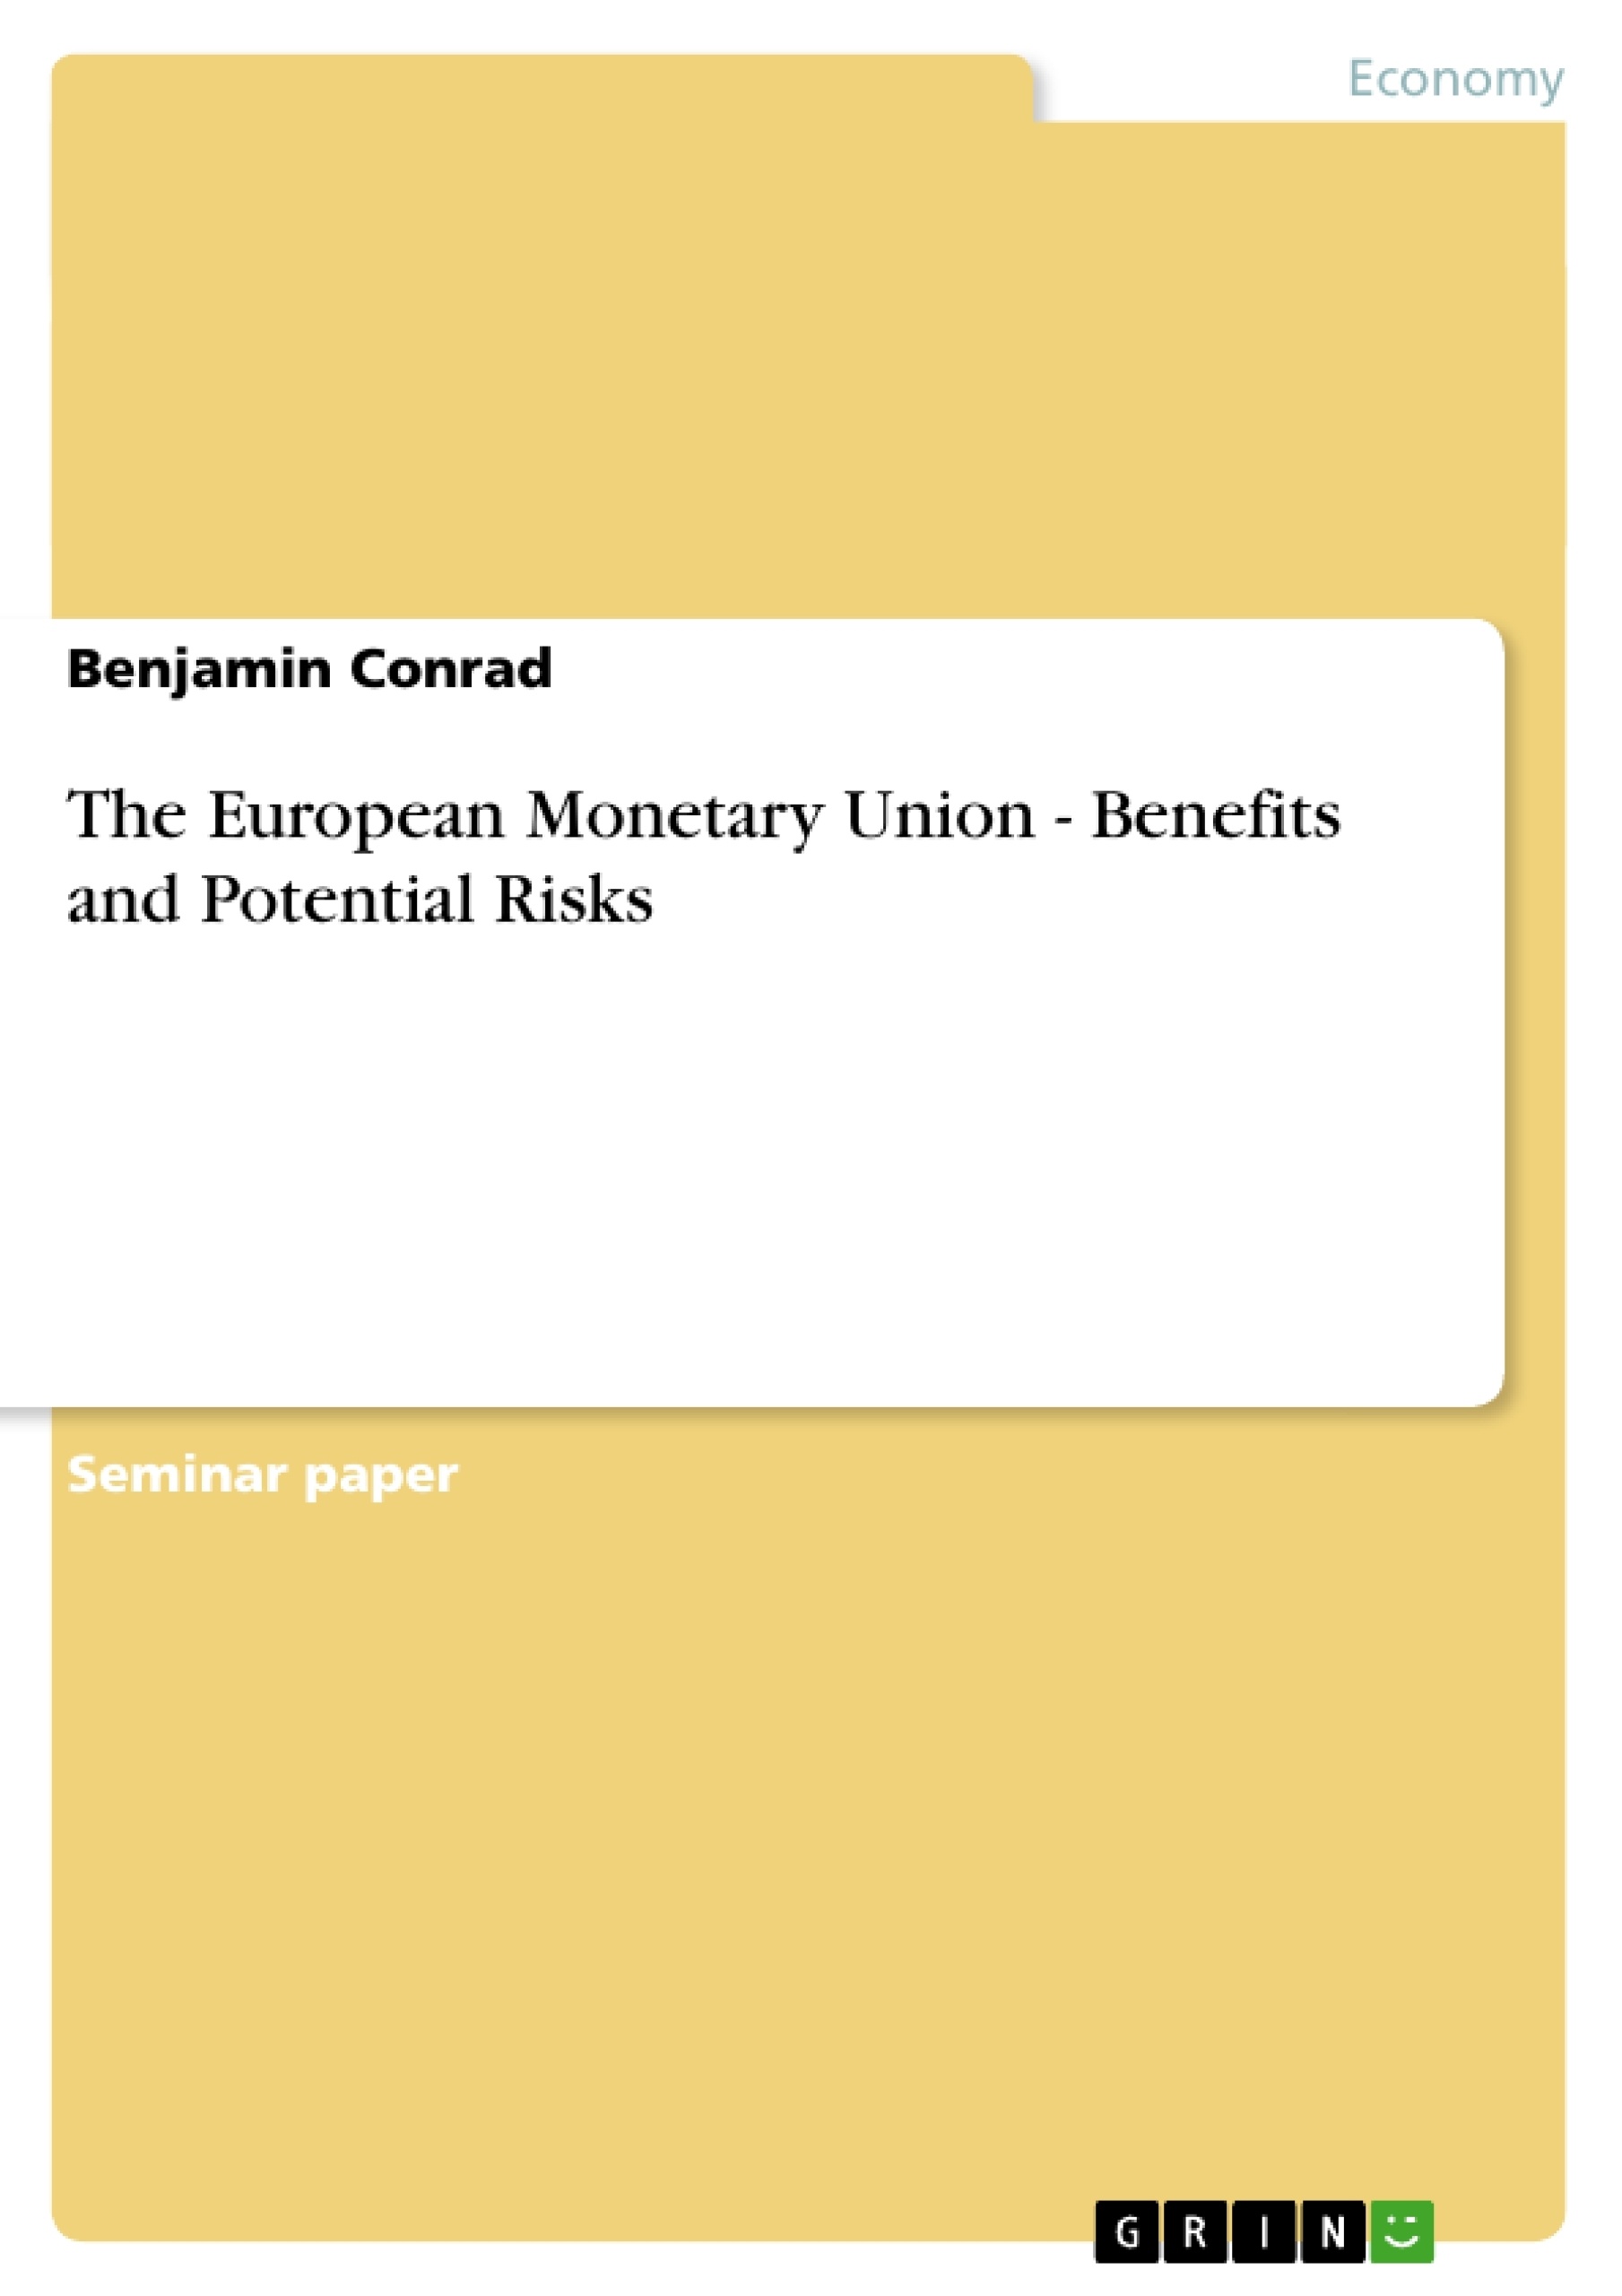 Titel: The European Monetary Union - Benefits and Potential Risks